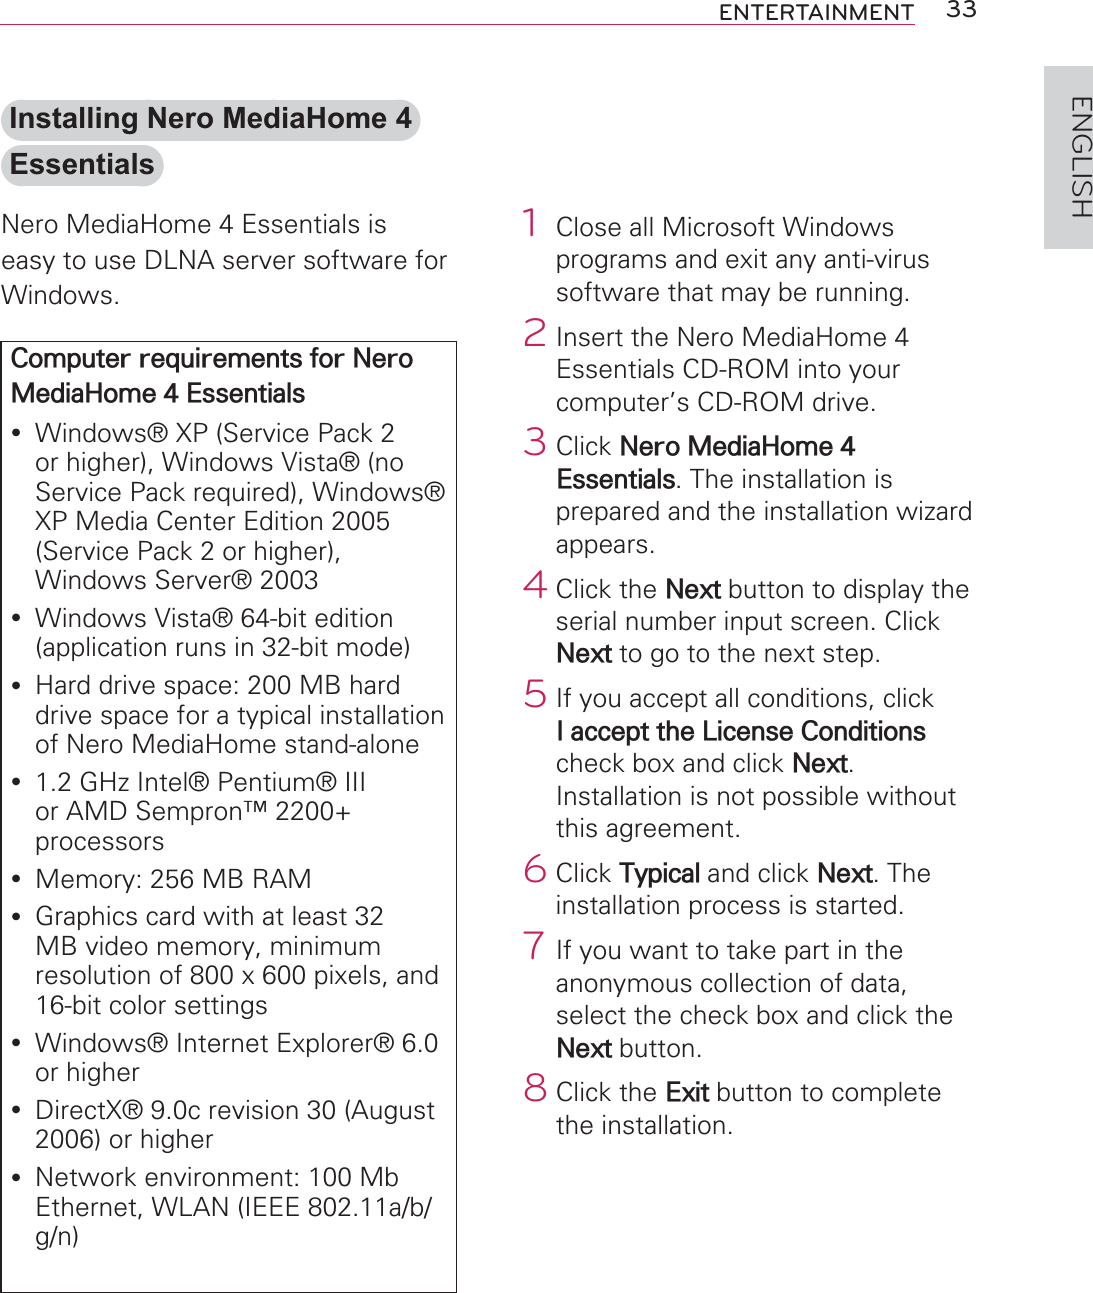 33ENTERTAINMENTENGLISH1  Close all Microsoft Windows programs and exit any anti-virus software that may be running.2 Insert the Nero MediaHome 4 Essentials CD-ROM into your computer’s CD-ROM drive.3 Click Nero MediaHome 4 Essentials. The installation is prepared and the installation wizard appears.4 Click the Next button to display the serial number input screen. Click Next to go to the next step.5 If you accept all conditions, click I accept the License Conditions check box and click Next. Installation is not possible without this agreement.6 Click Typical and click Next. The installation process is started.7 If you want to take part in the anonymous collection of data, select the check box and click the Next button.8 Click the Exit button to complete the installation.Installing Nero MediaHome 4 EssentialsNero MediaHome 4 Essentials is easy to use DLNA server software for Windows.Computer requirements for Nero MediaHome 4 Essentialsy Windows® XP (Service Pack 2 or higher), Windows Vista® (no Service Pack required), Windows® XP Media Center Edition 2005 (Service Pack 2 or higher), Windows Server® 2003y Windows Vista® 64-bit edition (application runs in 32-bit mode)y Hard drive space: 200 MB hard drive space for a typical installation of Nero MediaHome stand-aloney 1.2 GHz Intel® Pentium® III or AMD Sempron™ 2200+ processorsy Memory: 256 MB RAMy Graphics card with at least 32 MB video memory, minimum resolution of 800 x 600 pixels, and 16-bit color settingsy Windows® Internet Explorer® 6.0 or highery DirectX® 9.0c revision 30 (August 2006) or highery Network environment: 100 Mb Ethernet, WLAN (IEEE 802.11a/b/g/n)